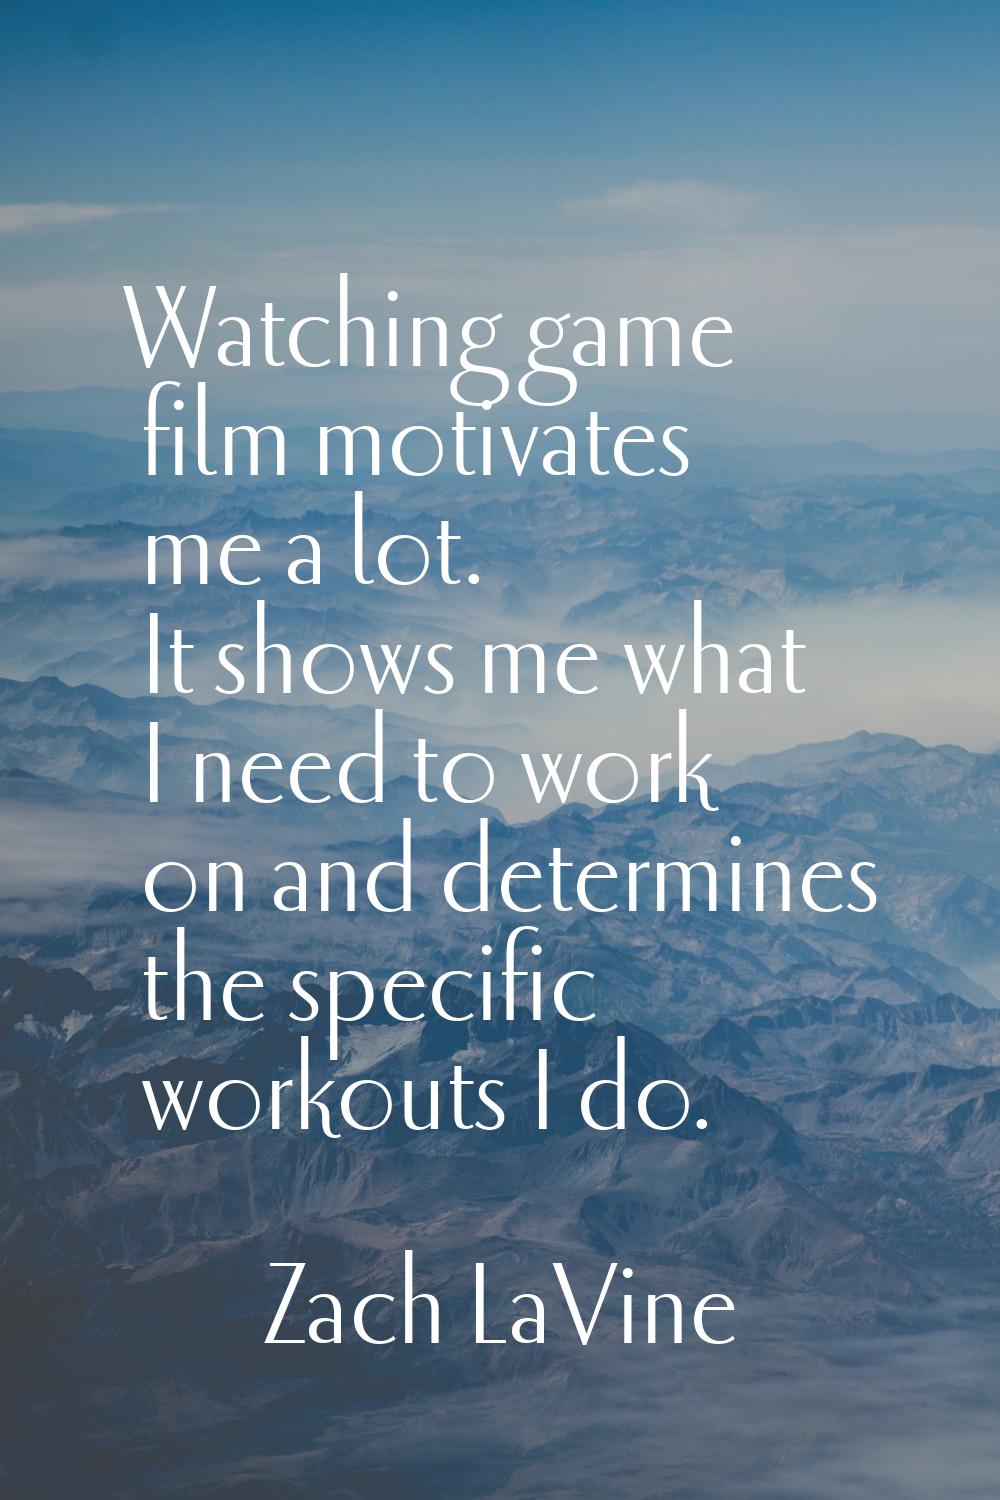 Watching game film motivates me a lot. It shows me what I need to work on and determines the specif